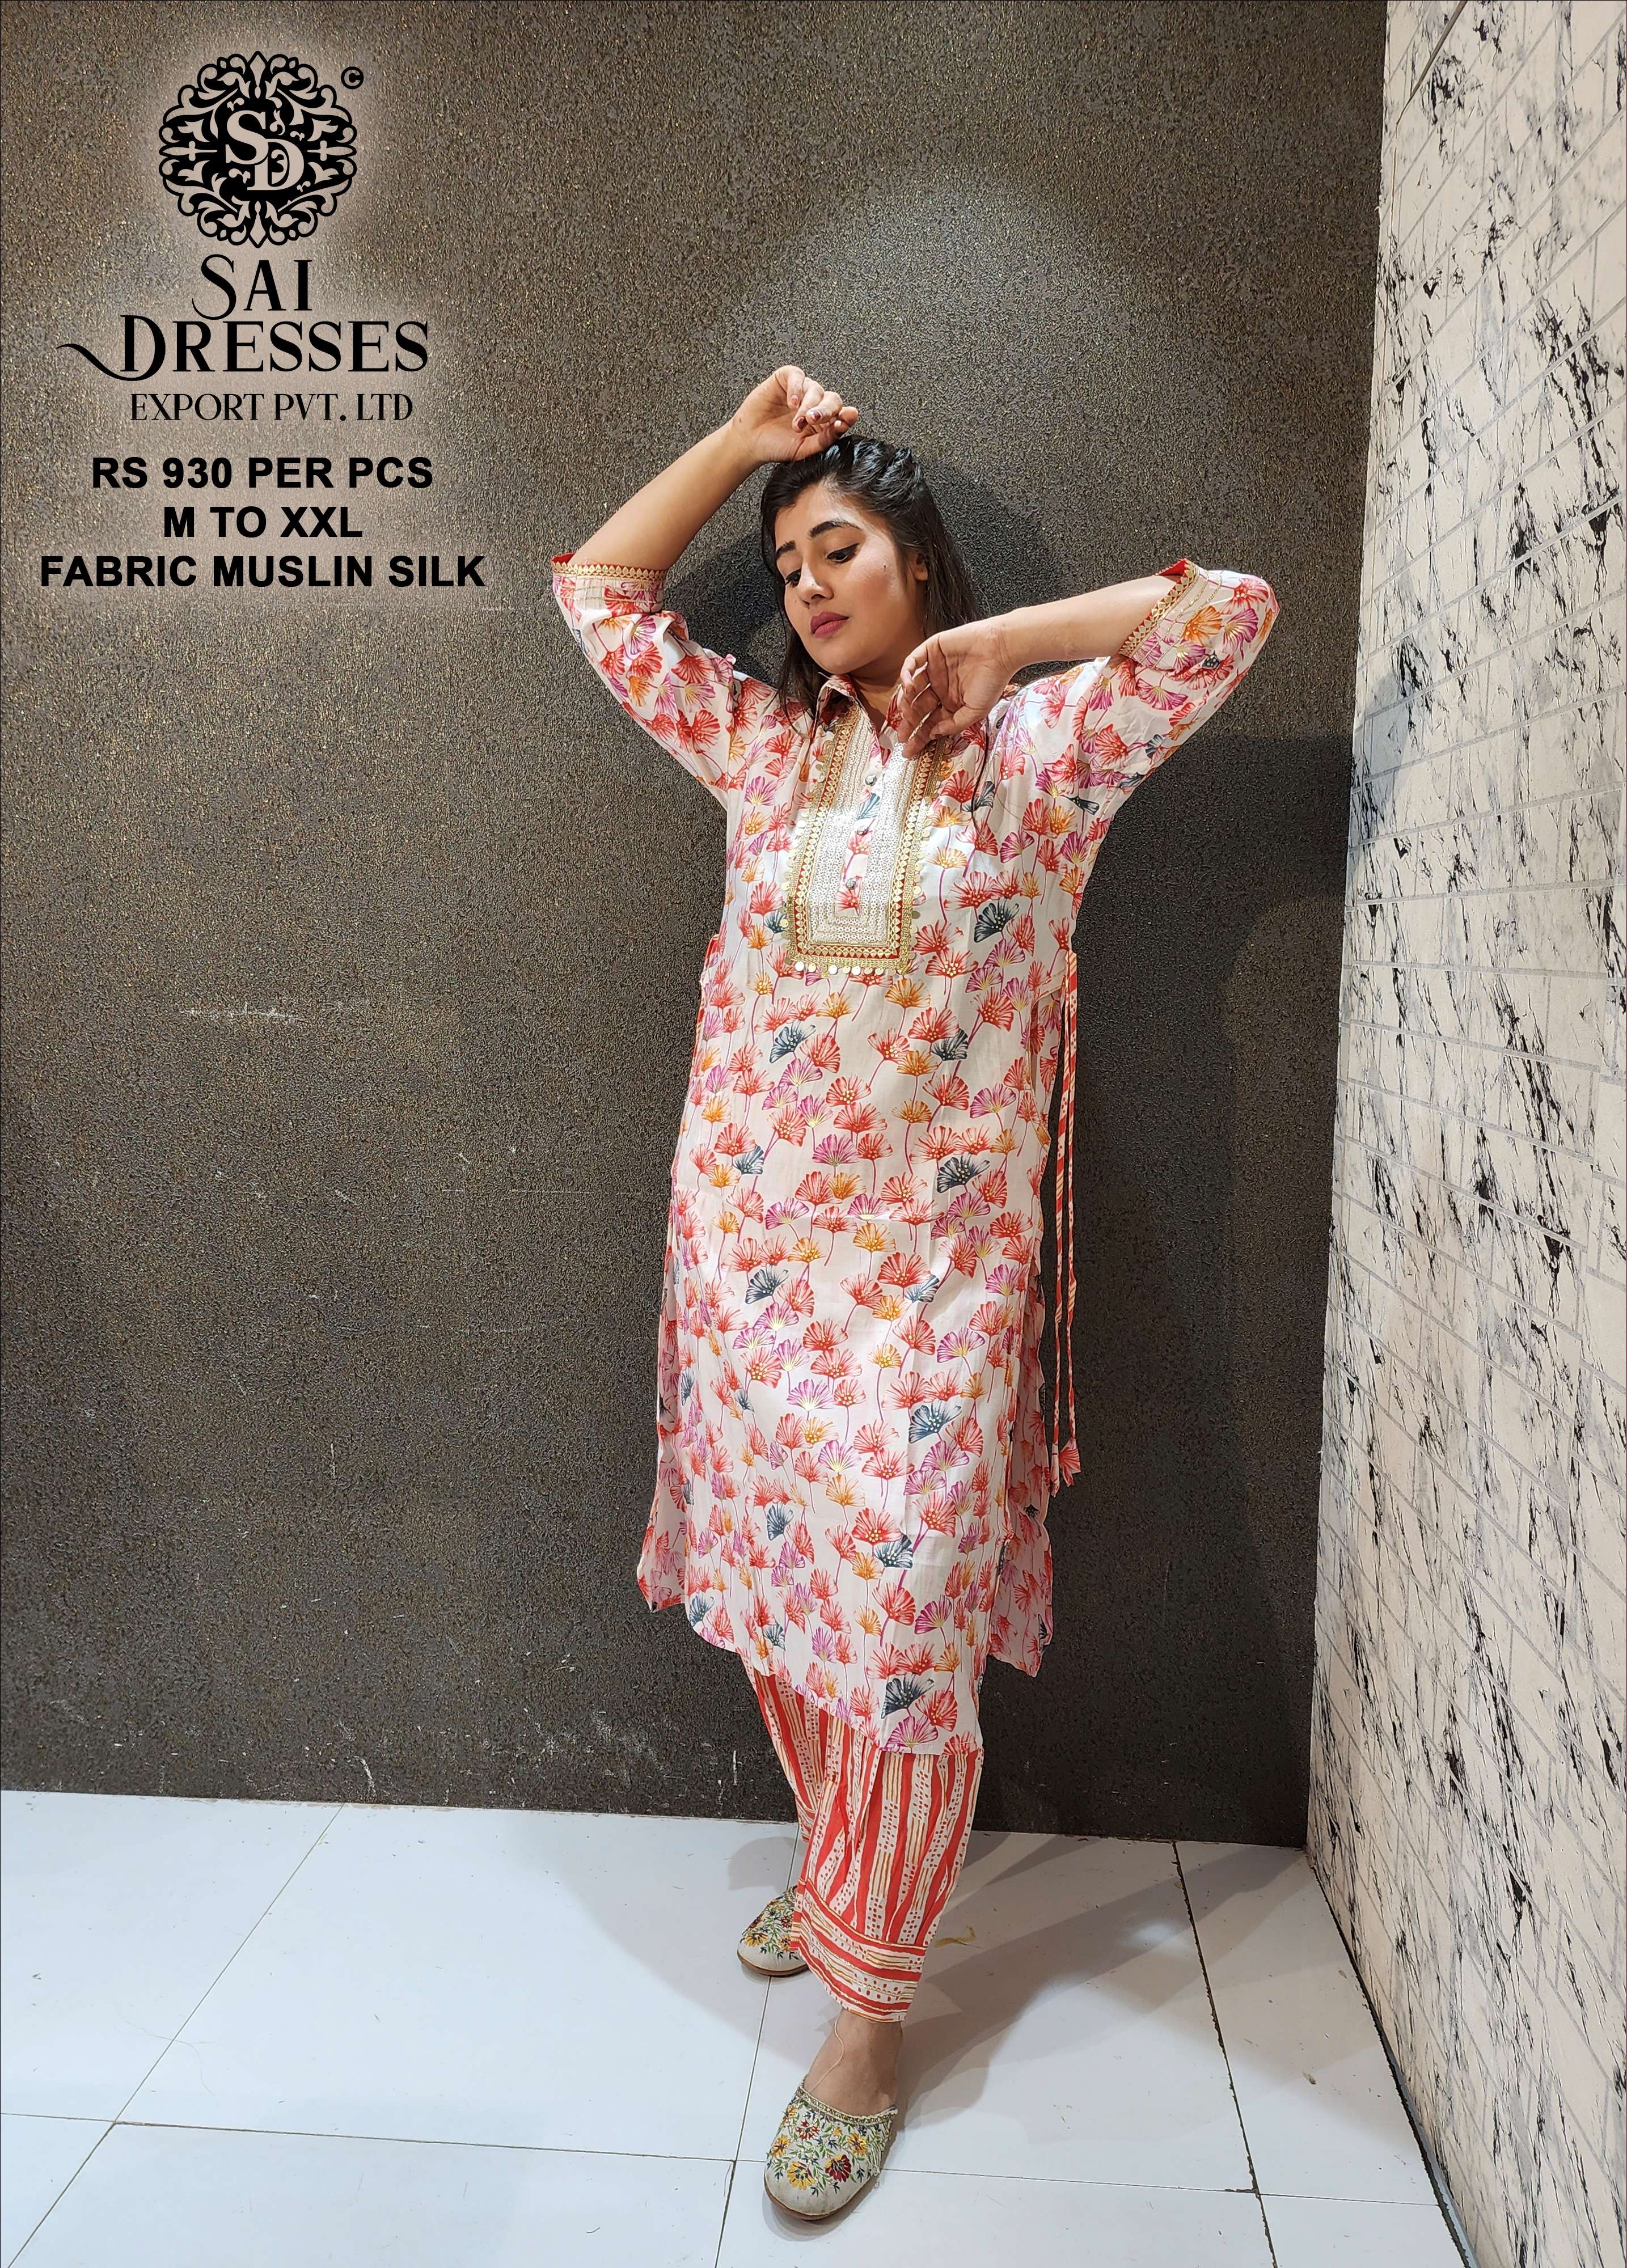 SAI DRESSES PRESENT D.NO 2057 READY TO EXCLUSIVE TRENDY WEAR PATHANI KURTA WITH AFGHANI PANT STYLE COMBO COLLECTION IN WHOLESALE RATE IN SURAT